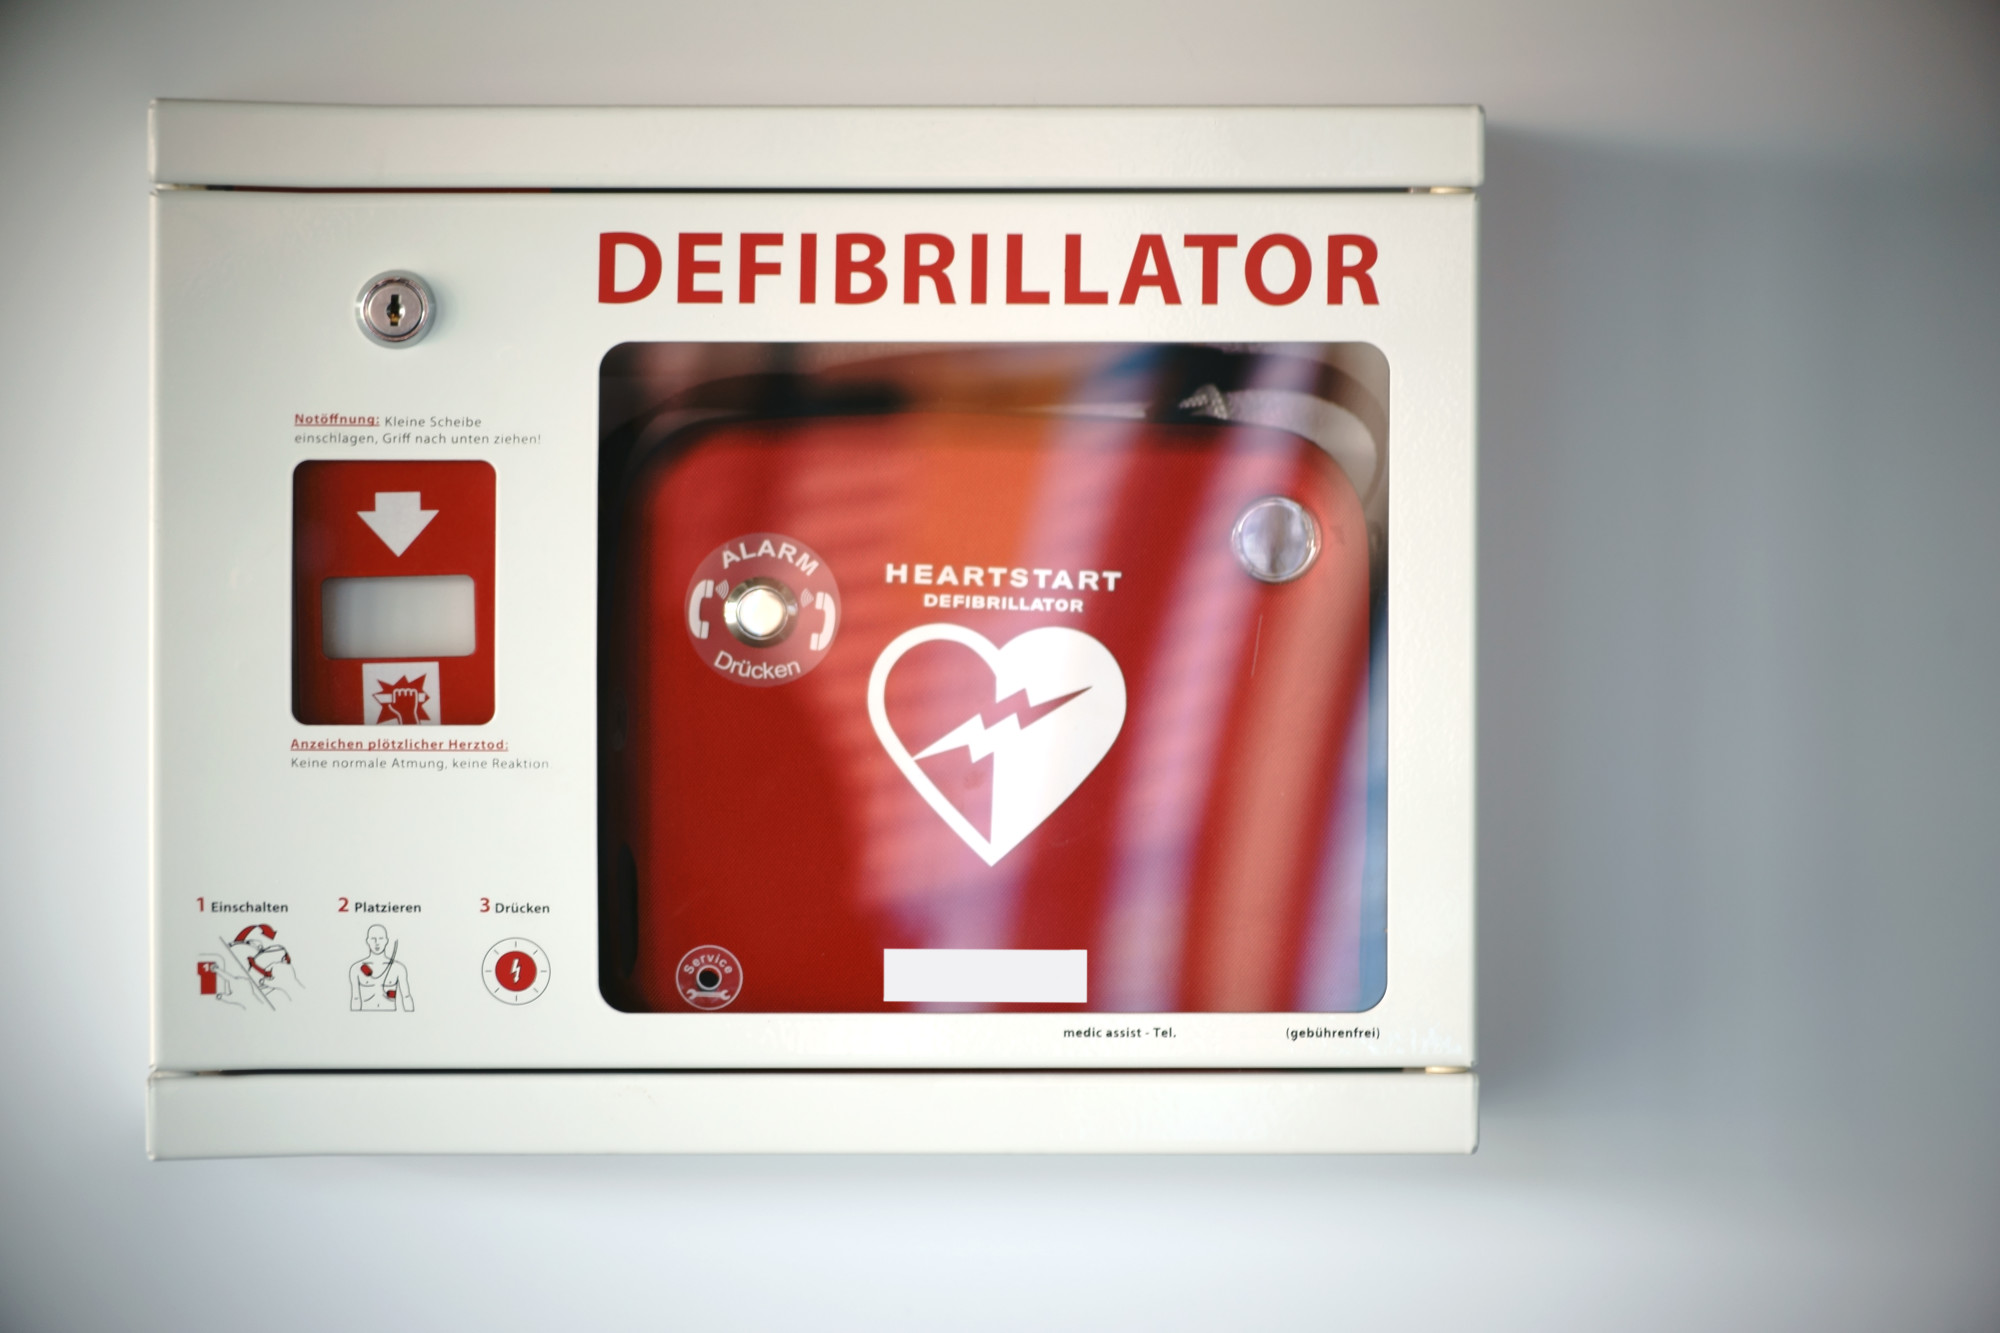 How to Use a Defibrillator When Disaster Strikes